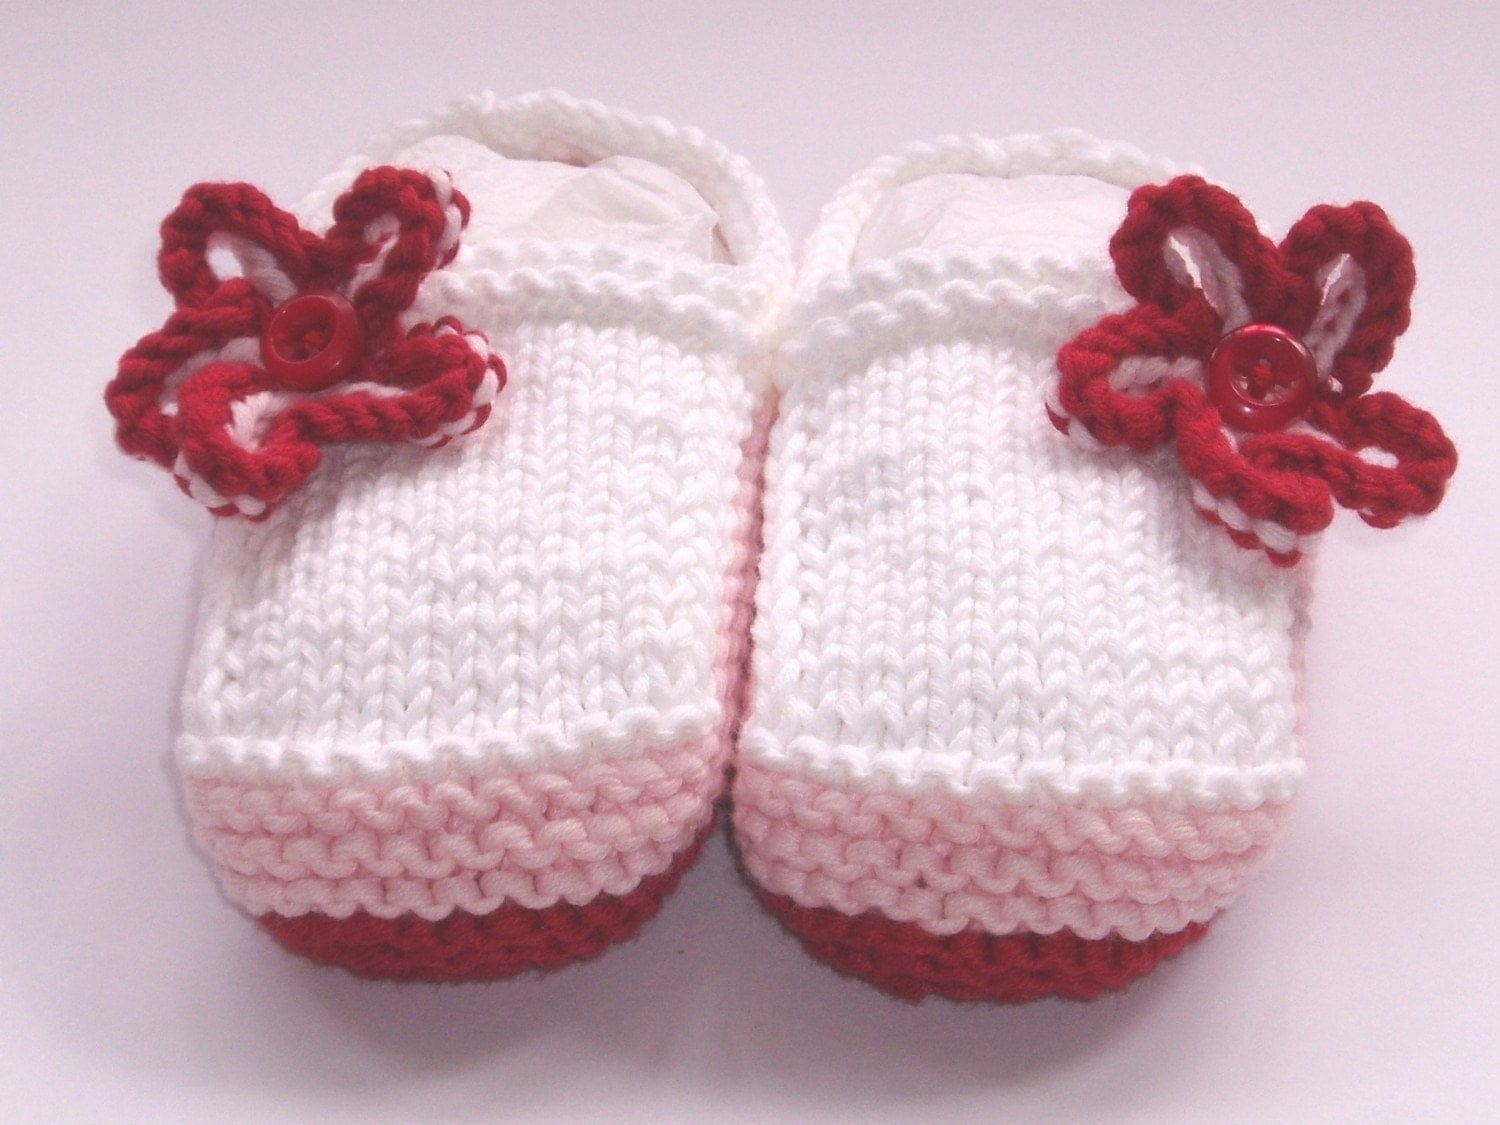 Free Baby Knitting Patterns from our Free Knitting Patterns